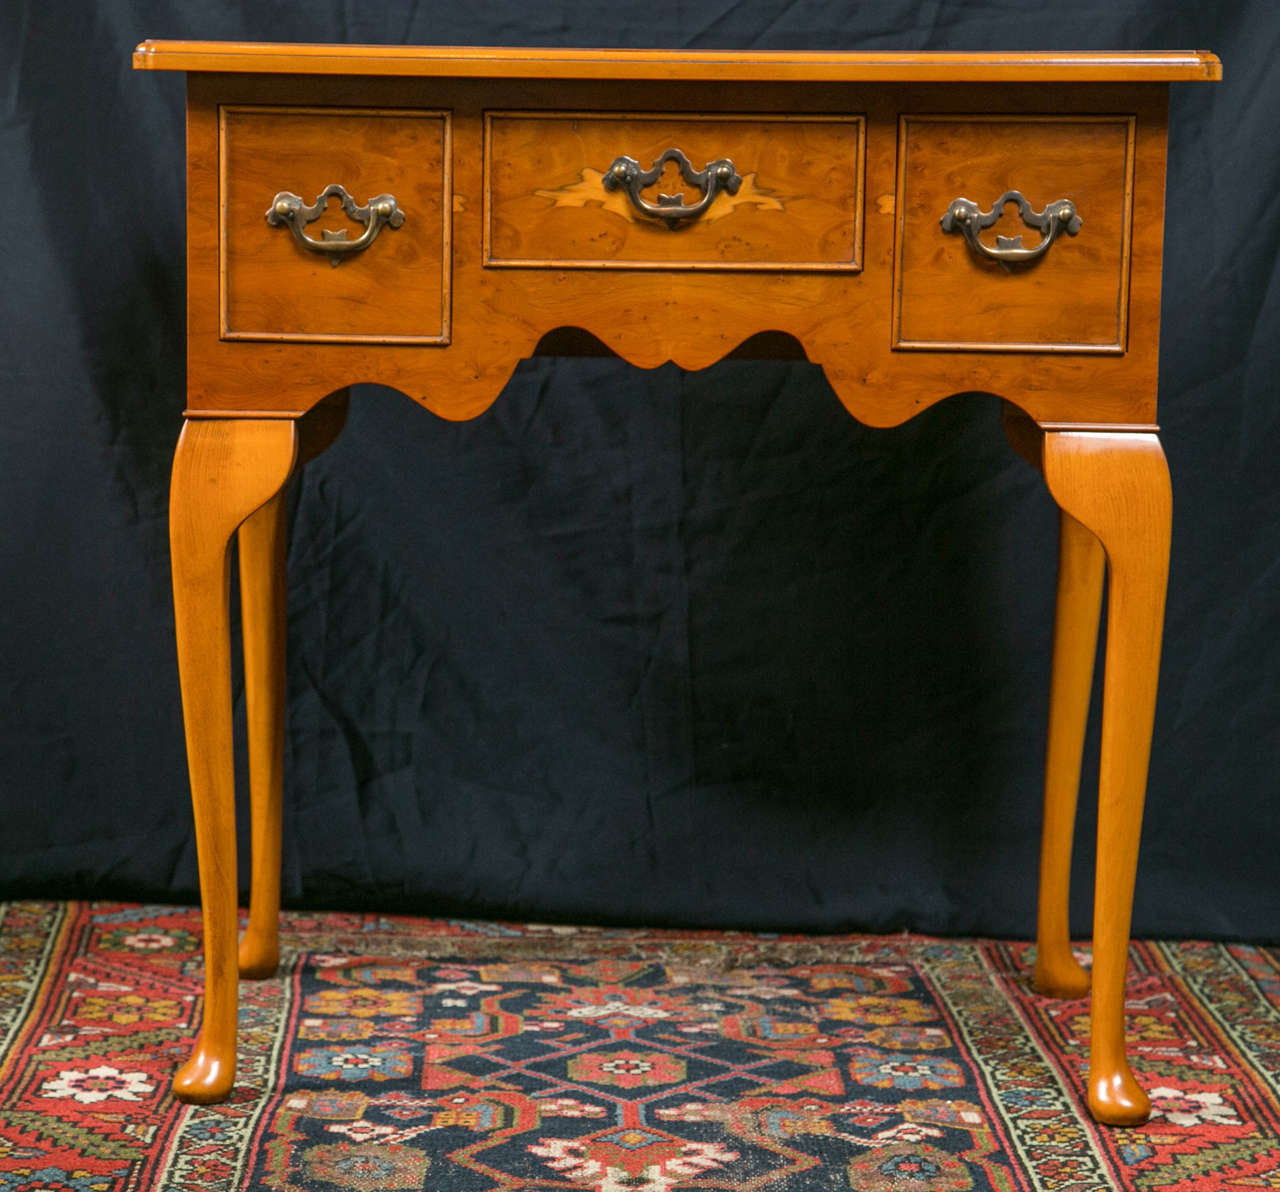 Custom-made for us by a small cabinet shop in England, this little lowboy in distinctive yew wood is proportioned squarely at 27” x 27” yet it reads more rectangular because the curved cabriole legs don’t take up the visual space of the drawers. In